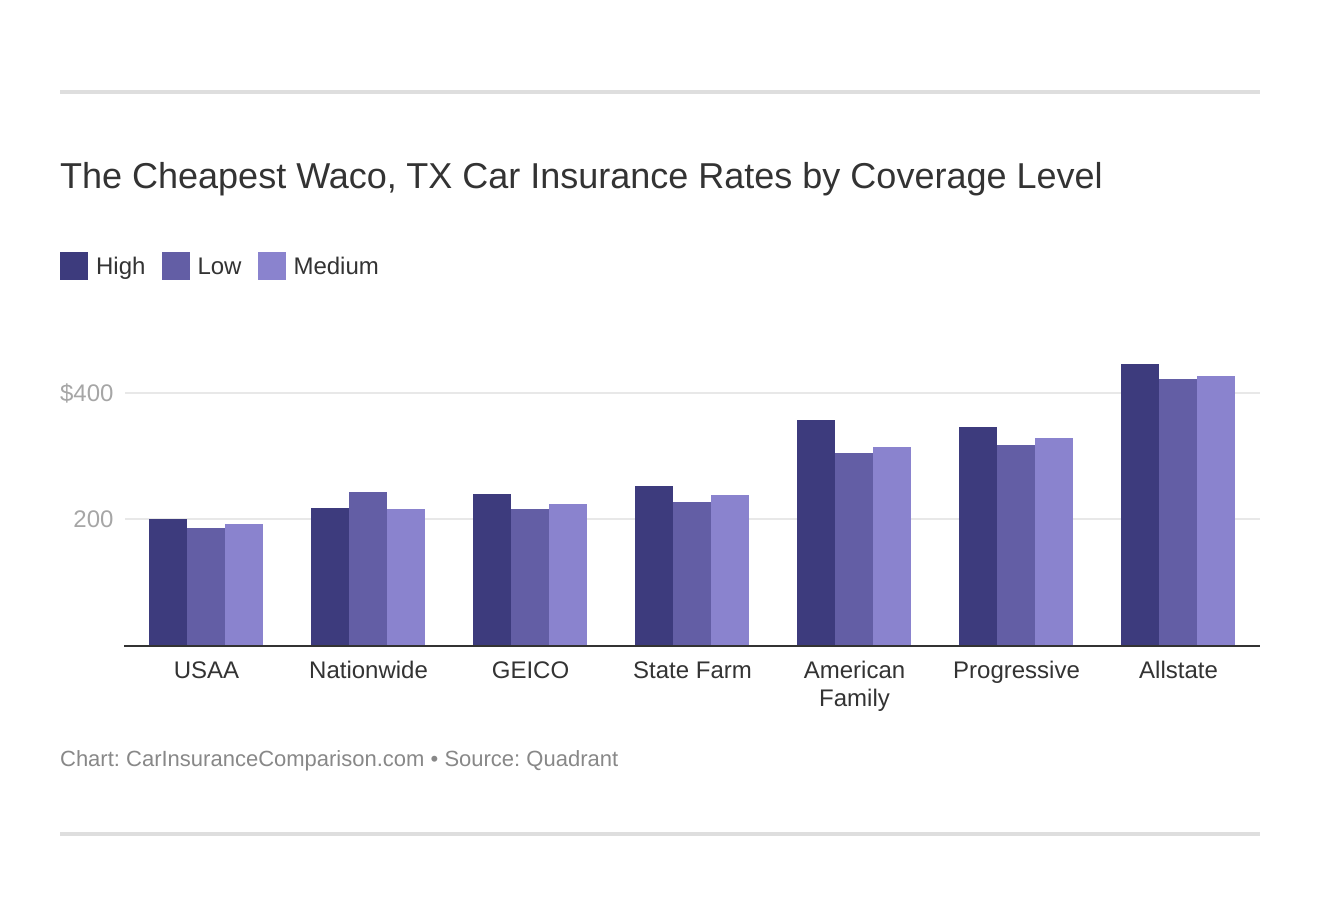 The Cheapest Waco, TX Car Insurance Rates by Coverage Level